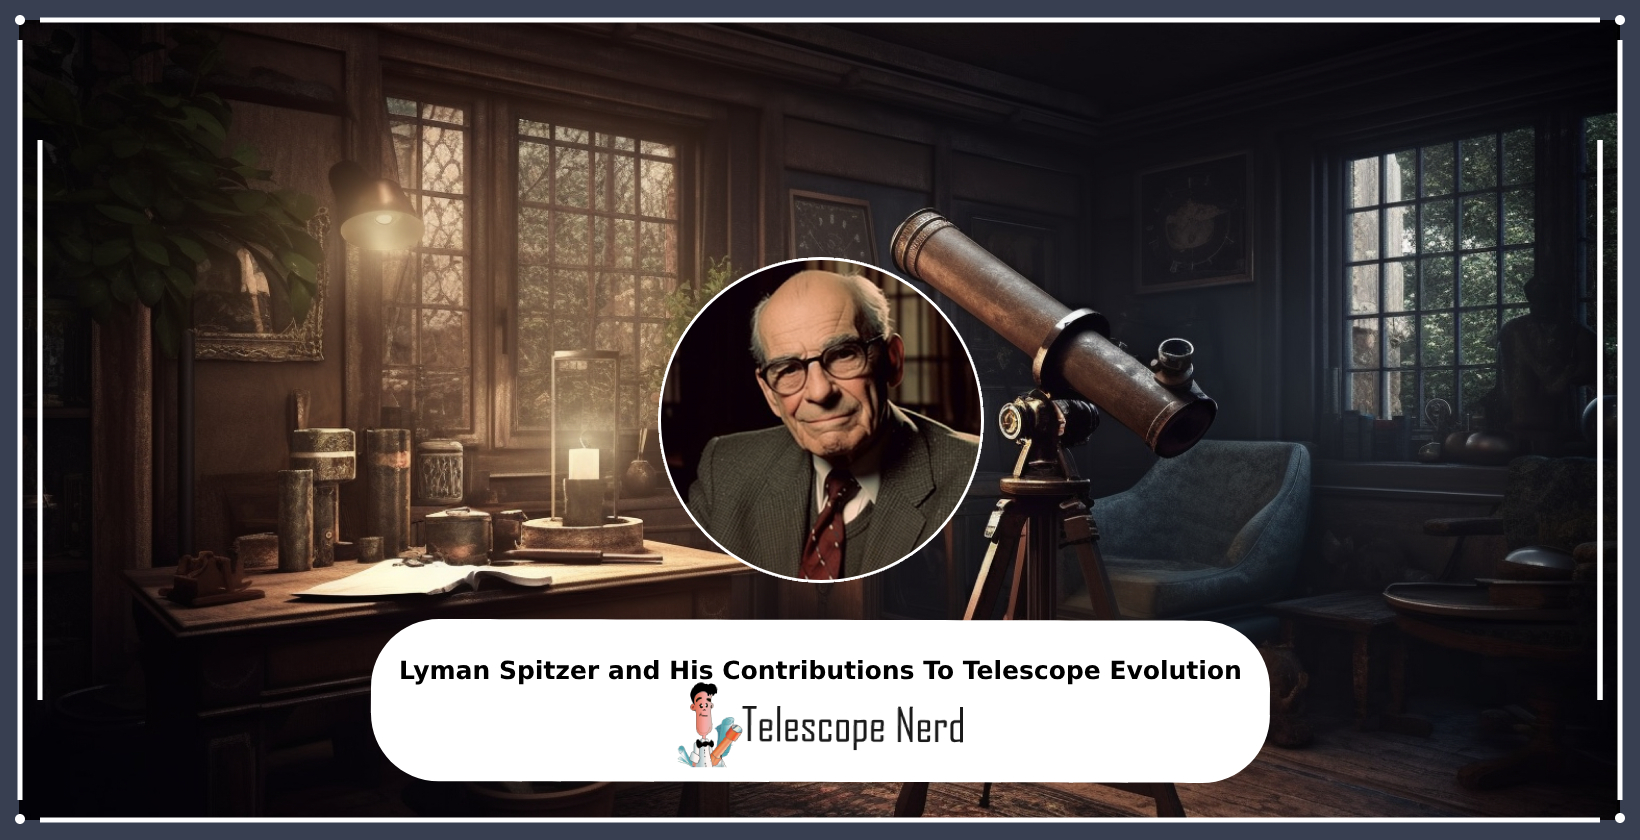 Lyman Spitzer theoretical physicist and his contributions to telescopes